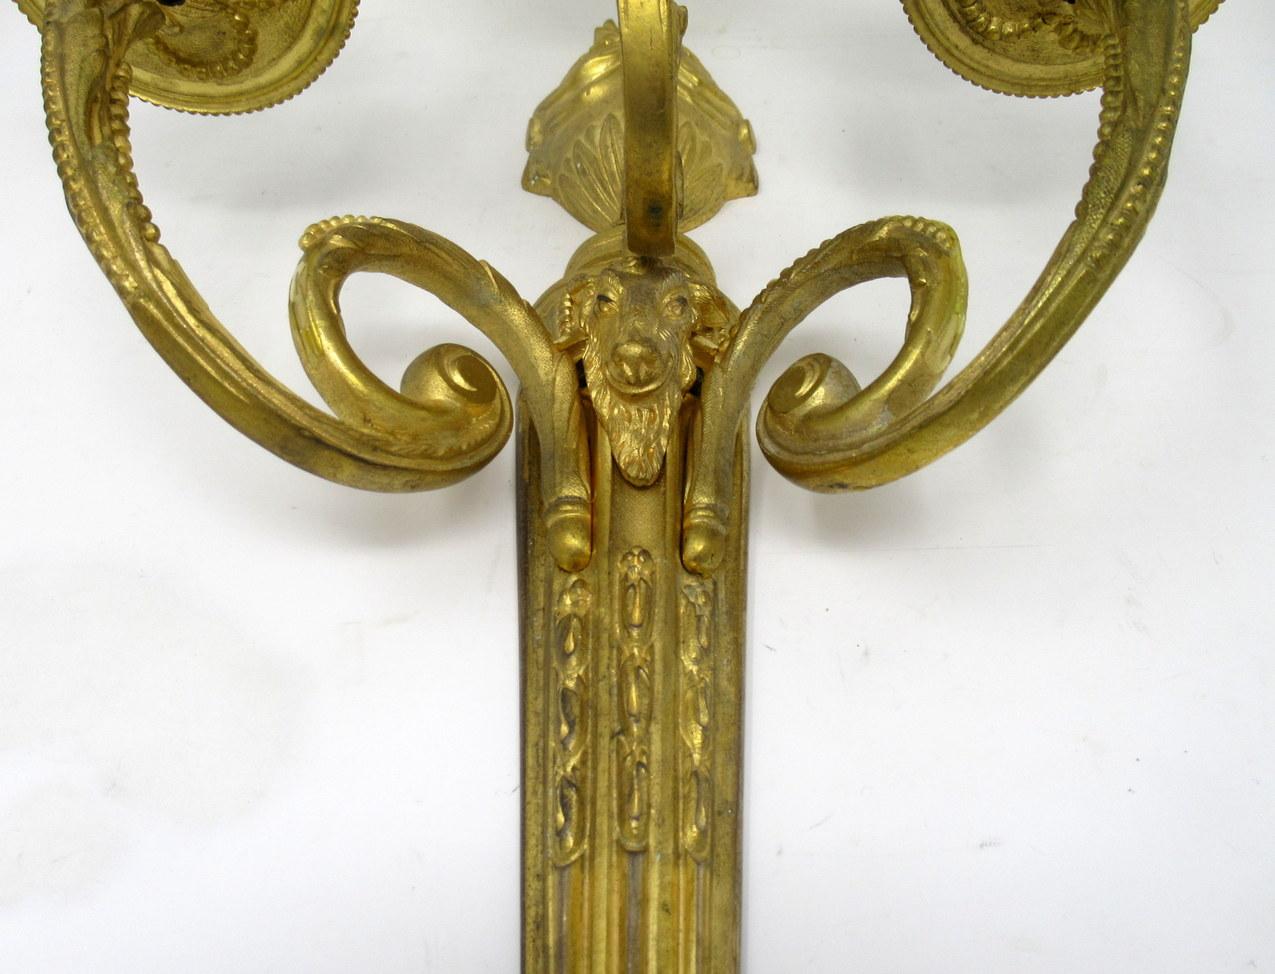 Edwardian Antique Pair of French Gilt Bronze Three-Light Wall Candle Sconces, 19th Century